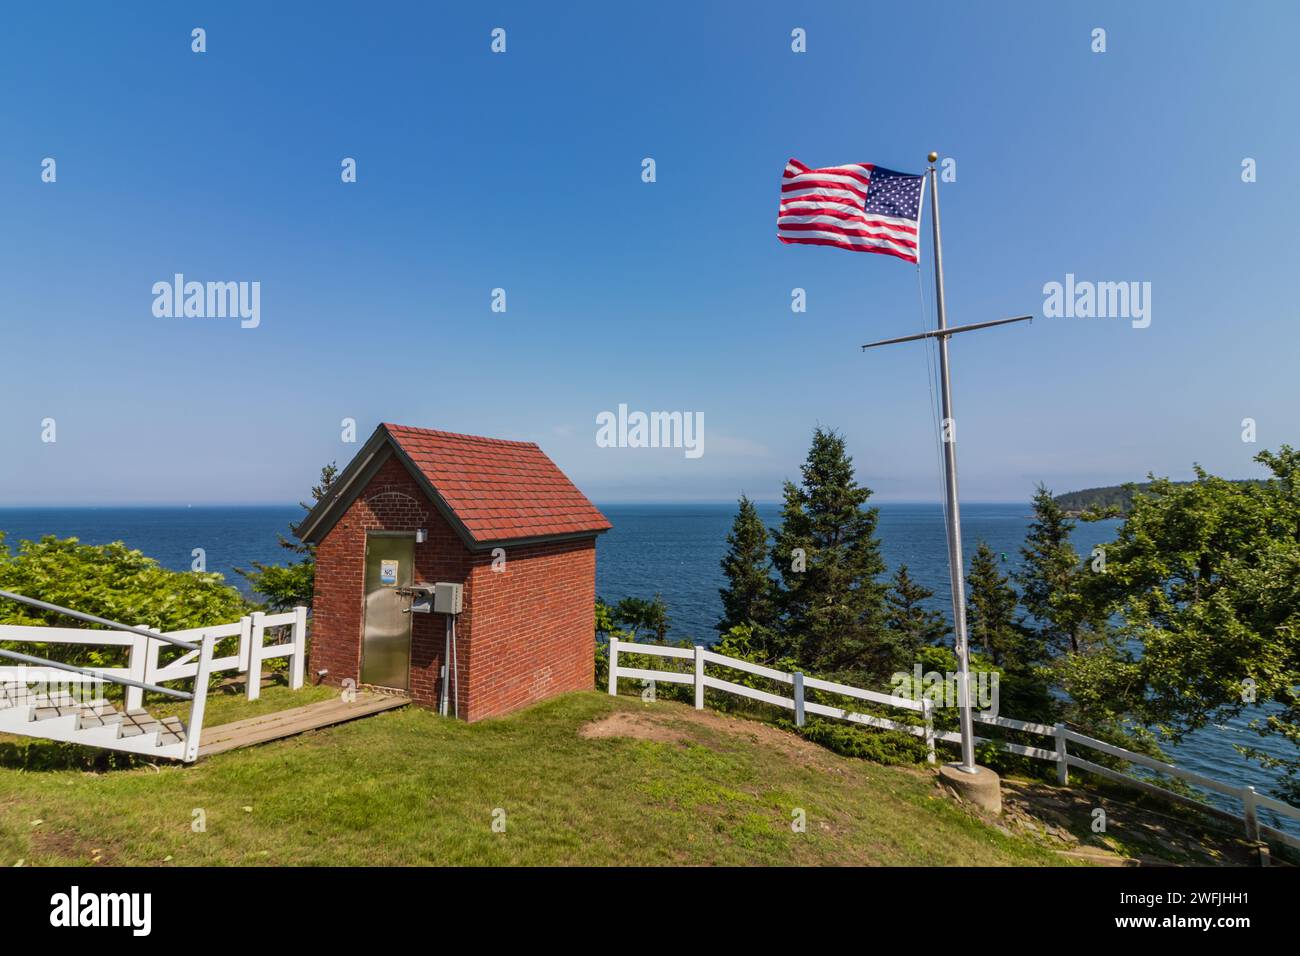 Owls Head Lighthouse in Rockland Maine USA on a clear sunny summer day with blue sky Stock Photo